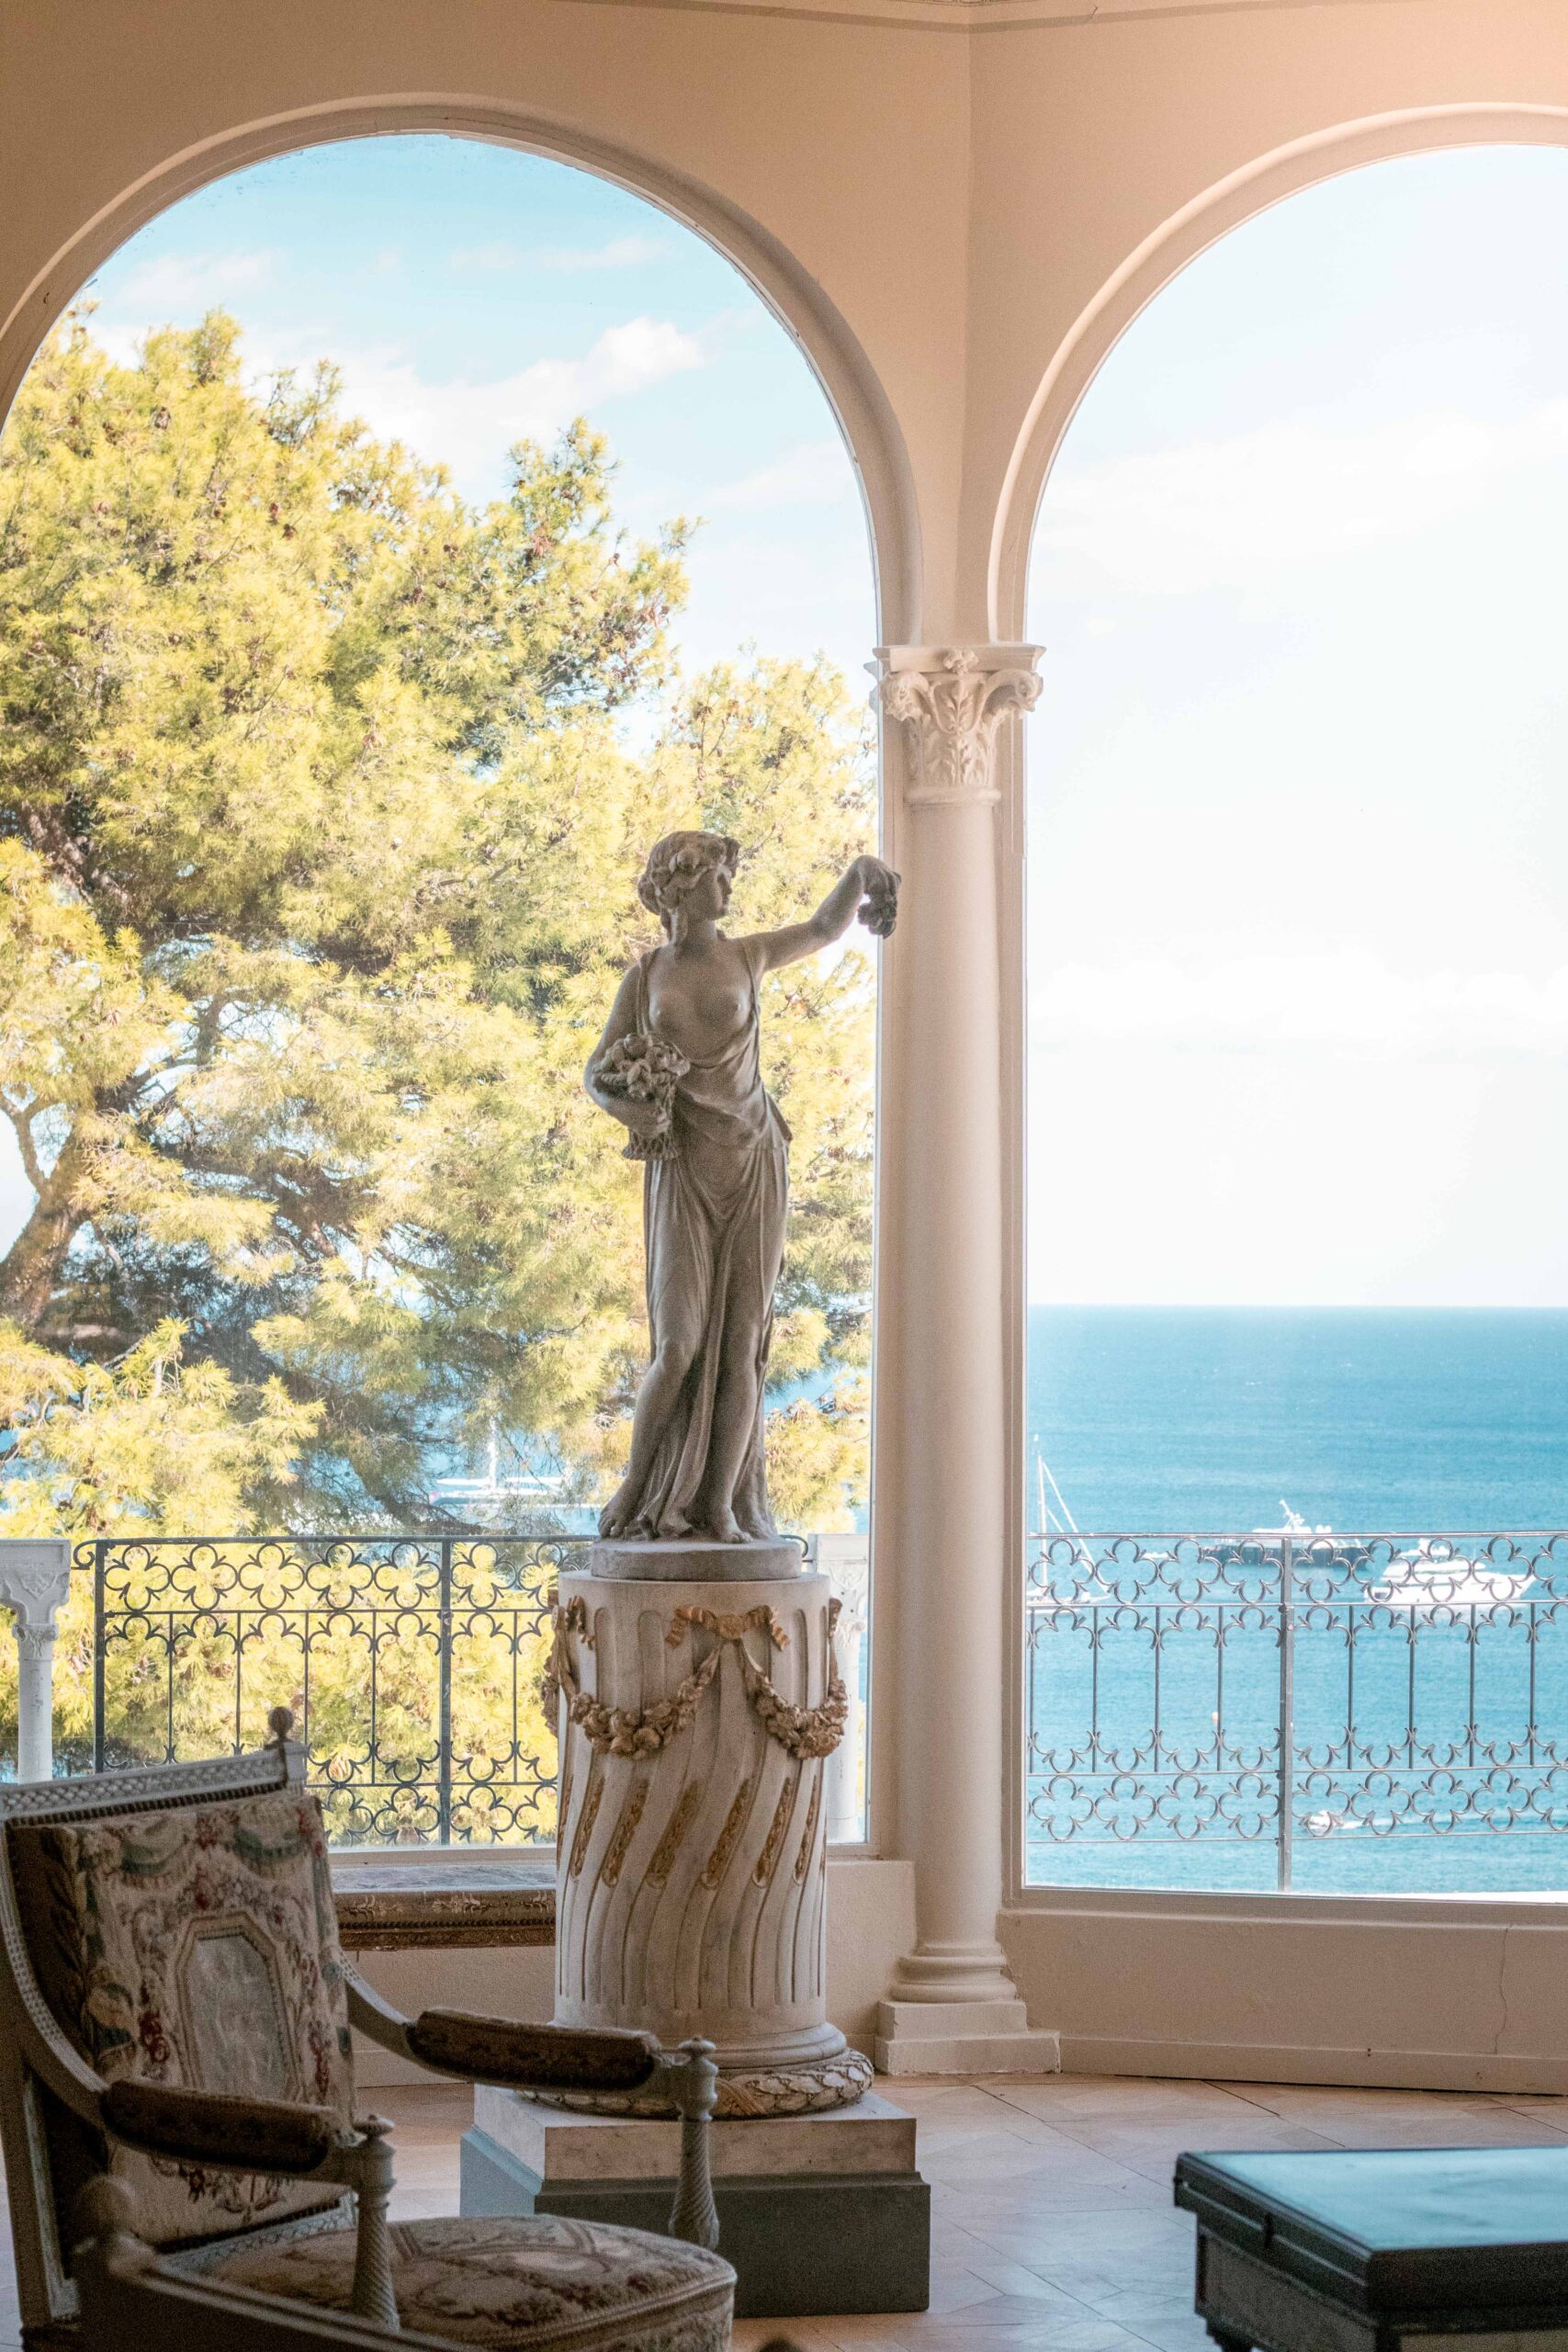 Indoor room of the Villa Ephrussi de Rothschild with a statue, a chair and a view over the Mediterranean sea on a sunny day in Saint-Jean-Cap-Ferrat, France